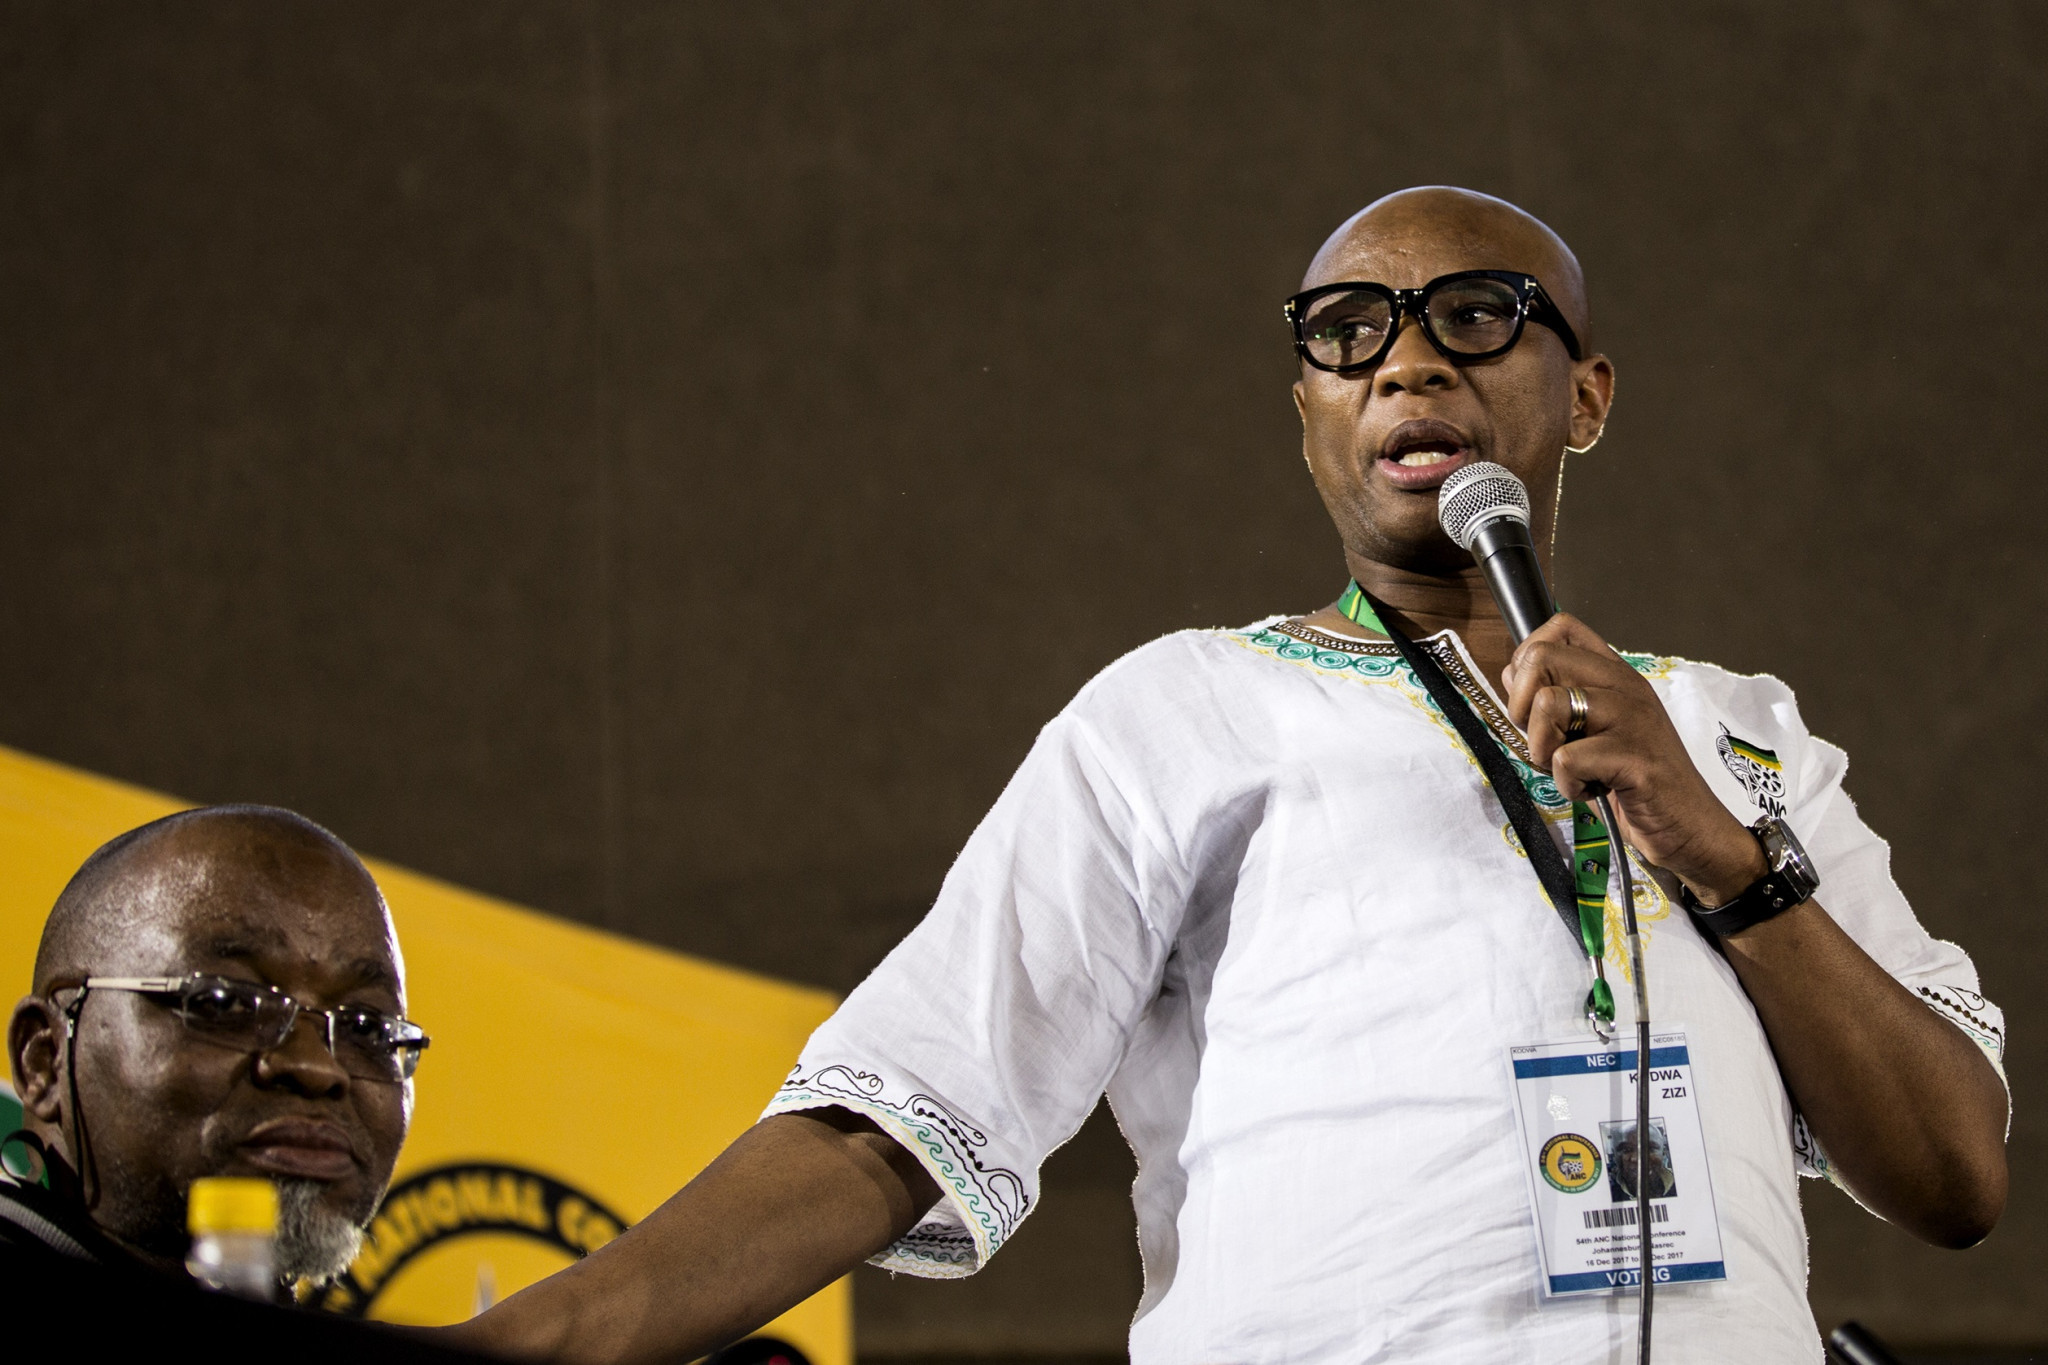 Zizi Kodwa has been appointed as South Africa's new Sports Minister as part of a Cabinet reshuffle ©Getty Images